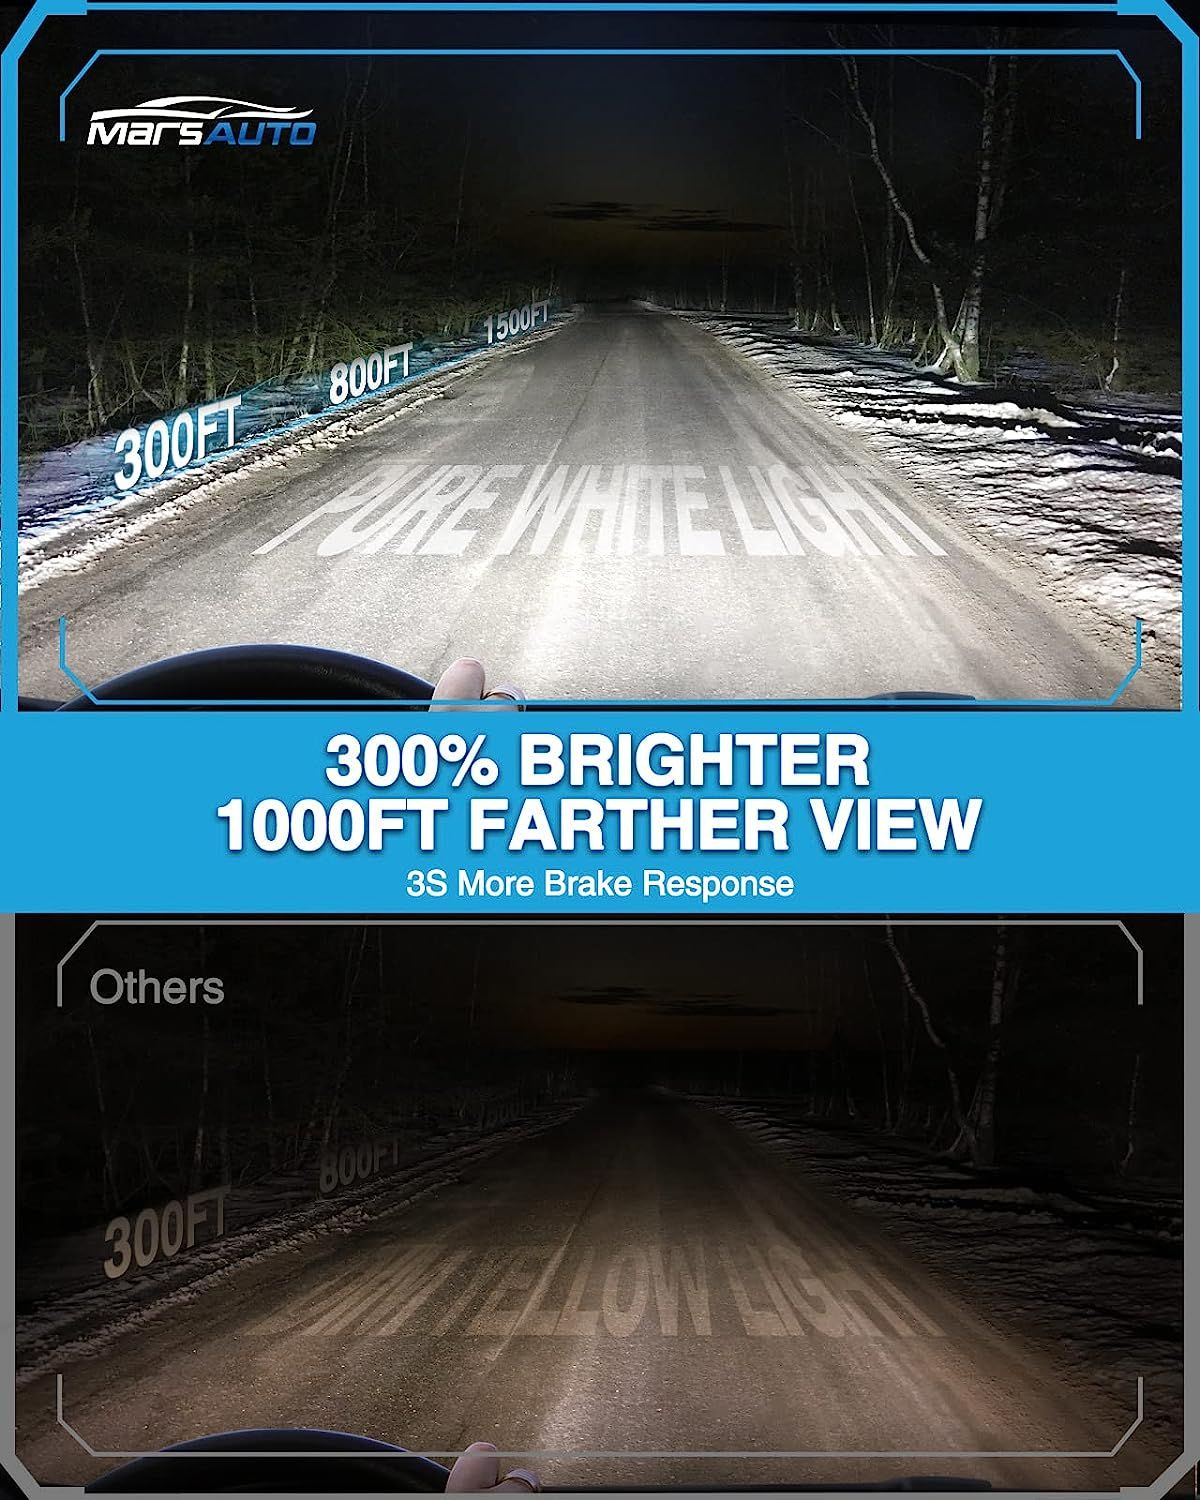 【2 PCS】 HID Bulbs, 6000K Cold White, Xenon Replacement Bulb, 4500 Hours Longevity, Waterproof Design, Up to 350% Brightness